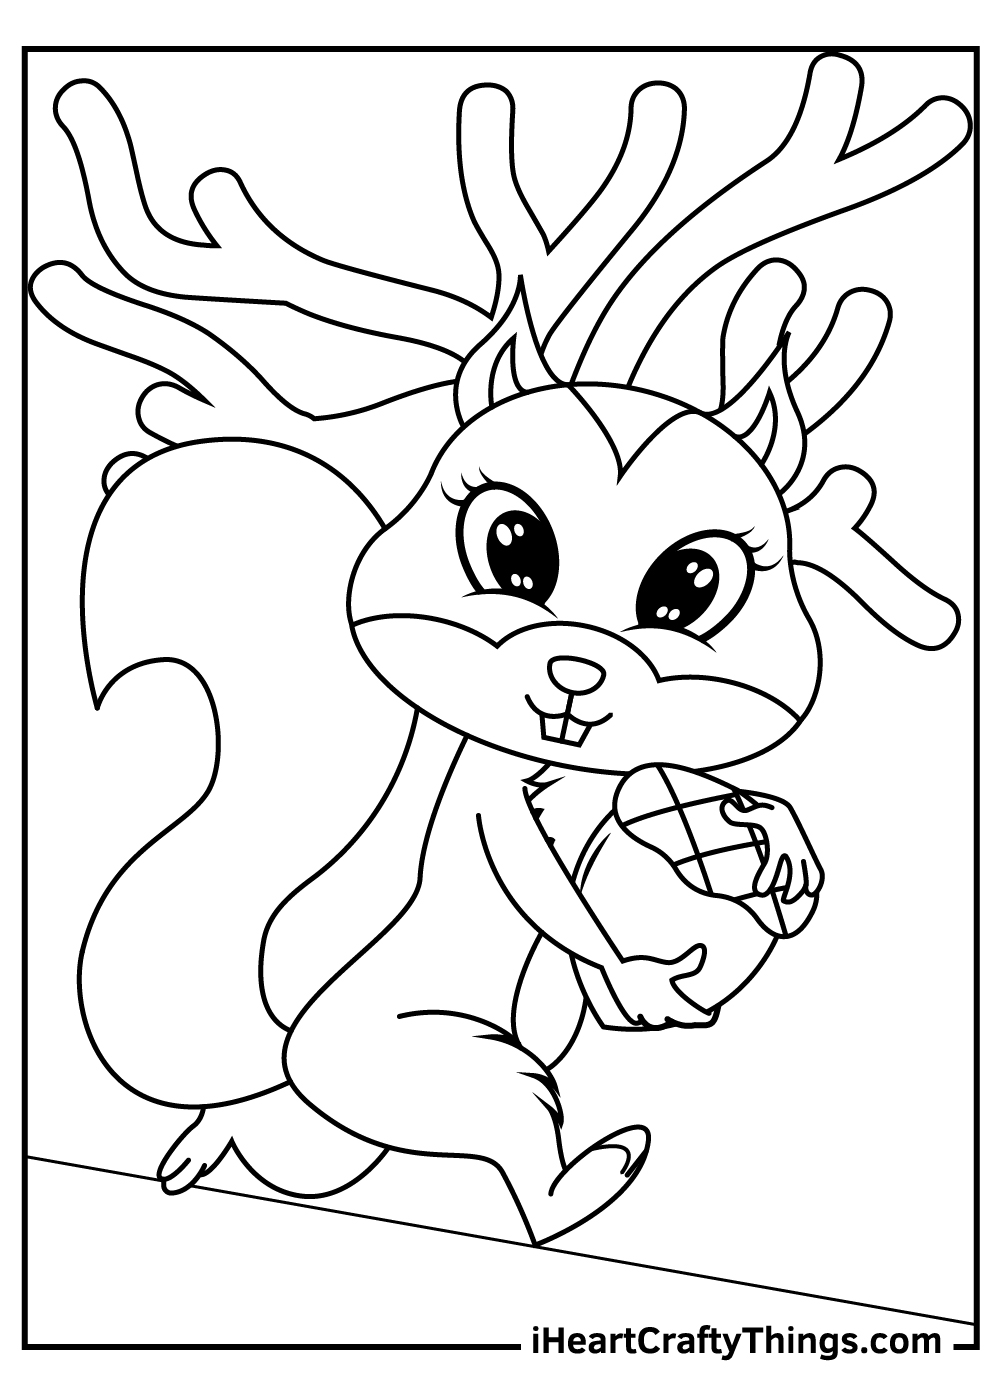 Simple animal coloring pages free printables